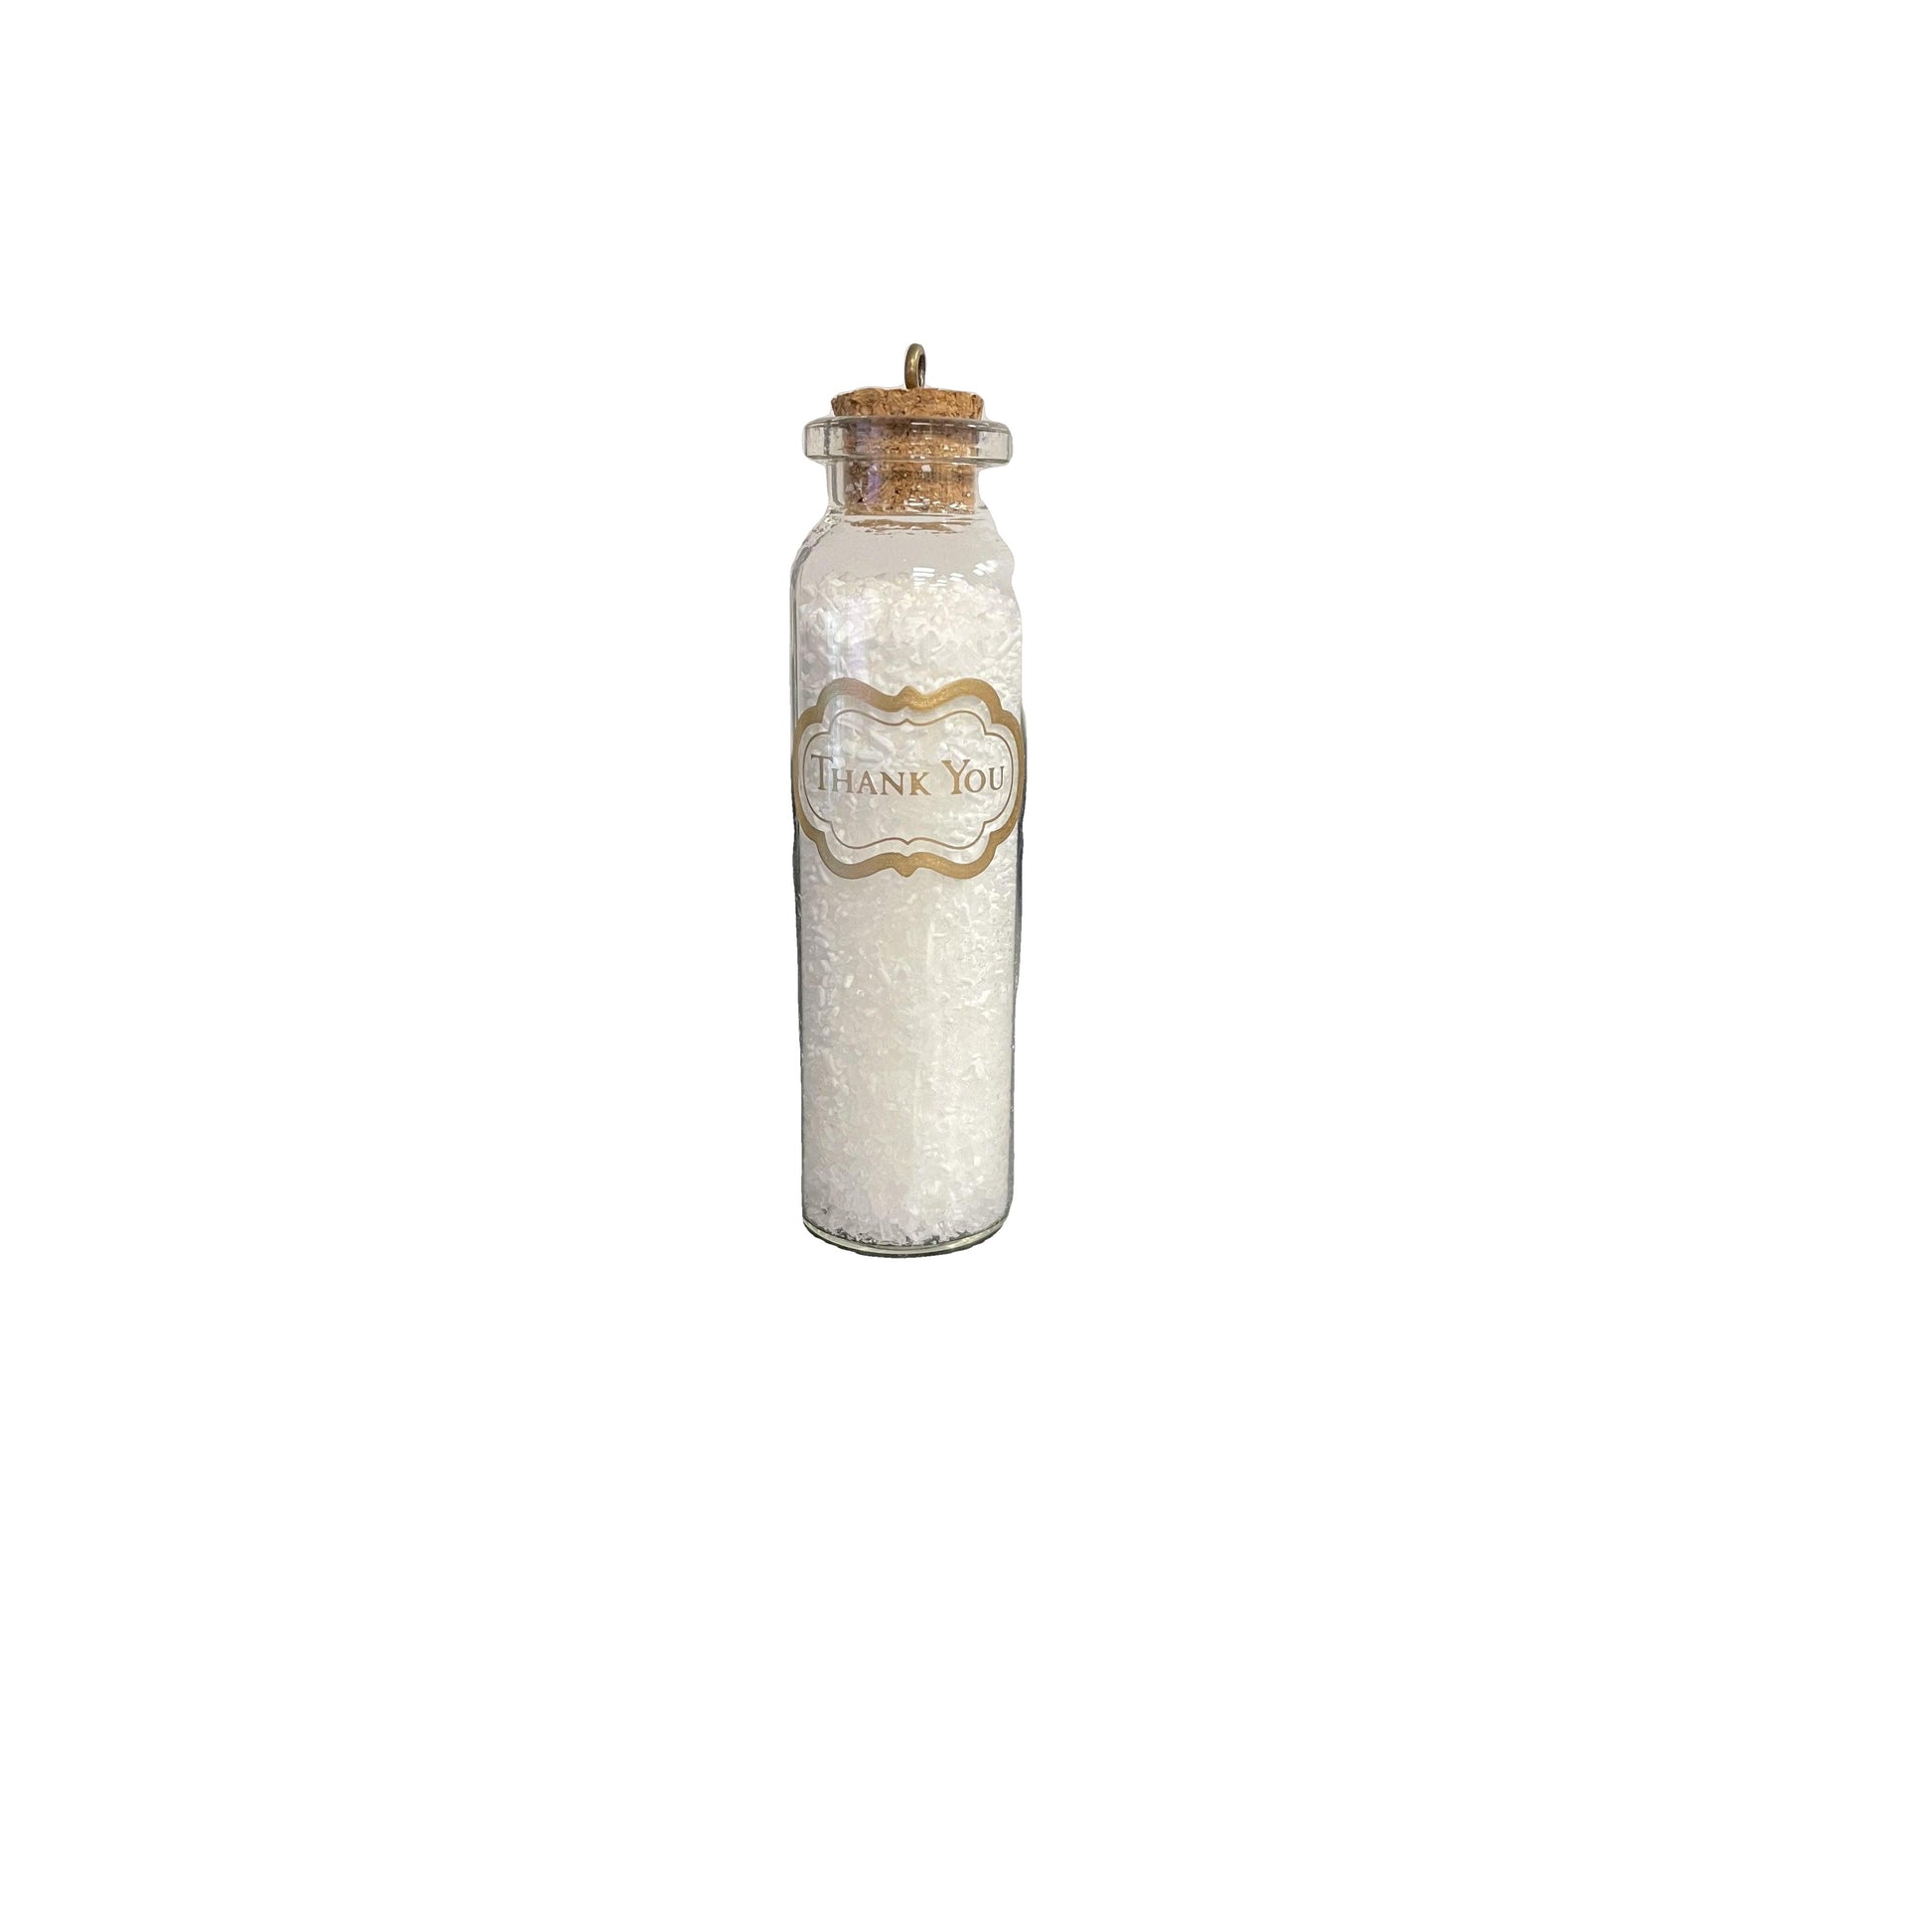 Bath Salt in 1 oz "Thank You" Bottle-Your Private Bar